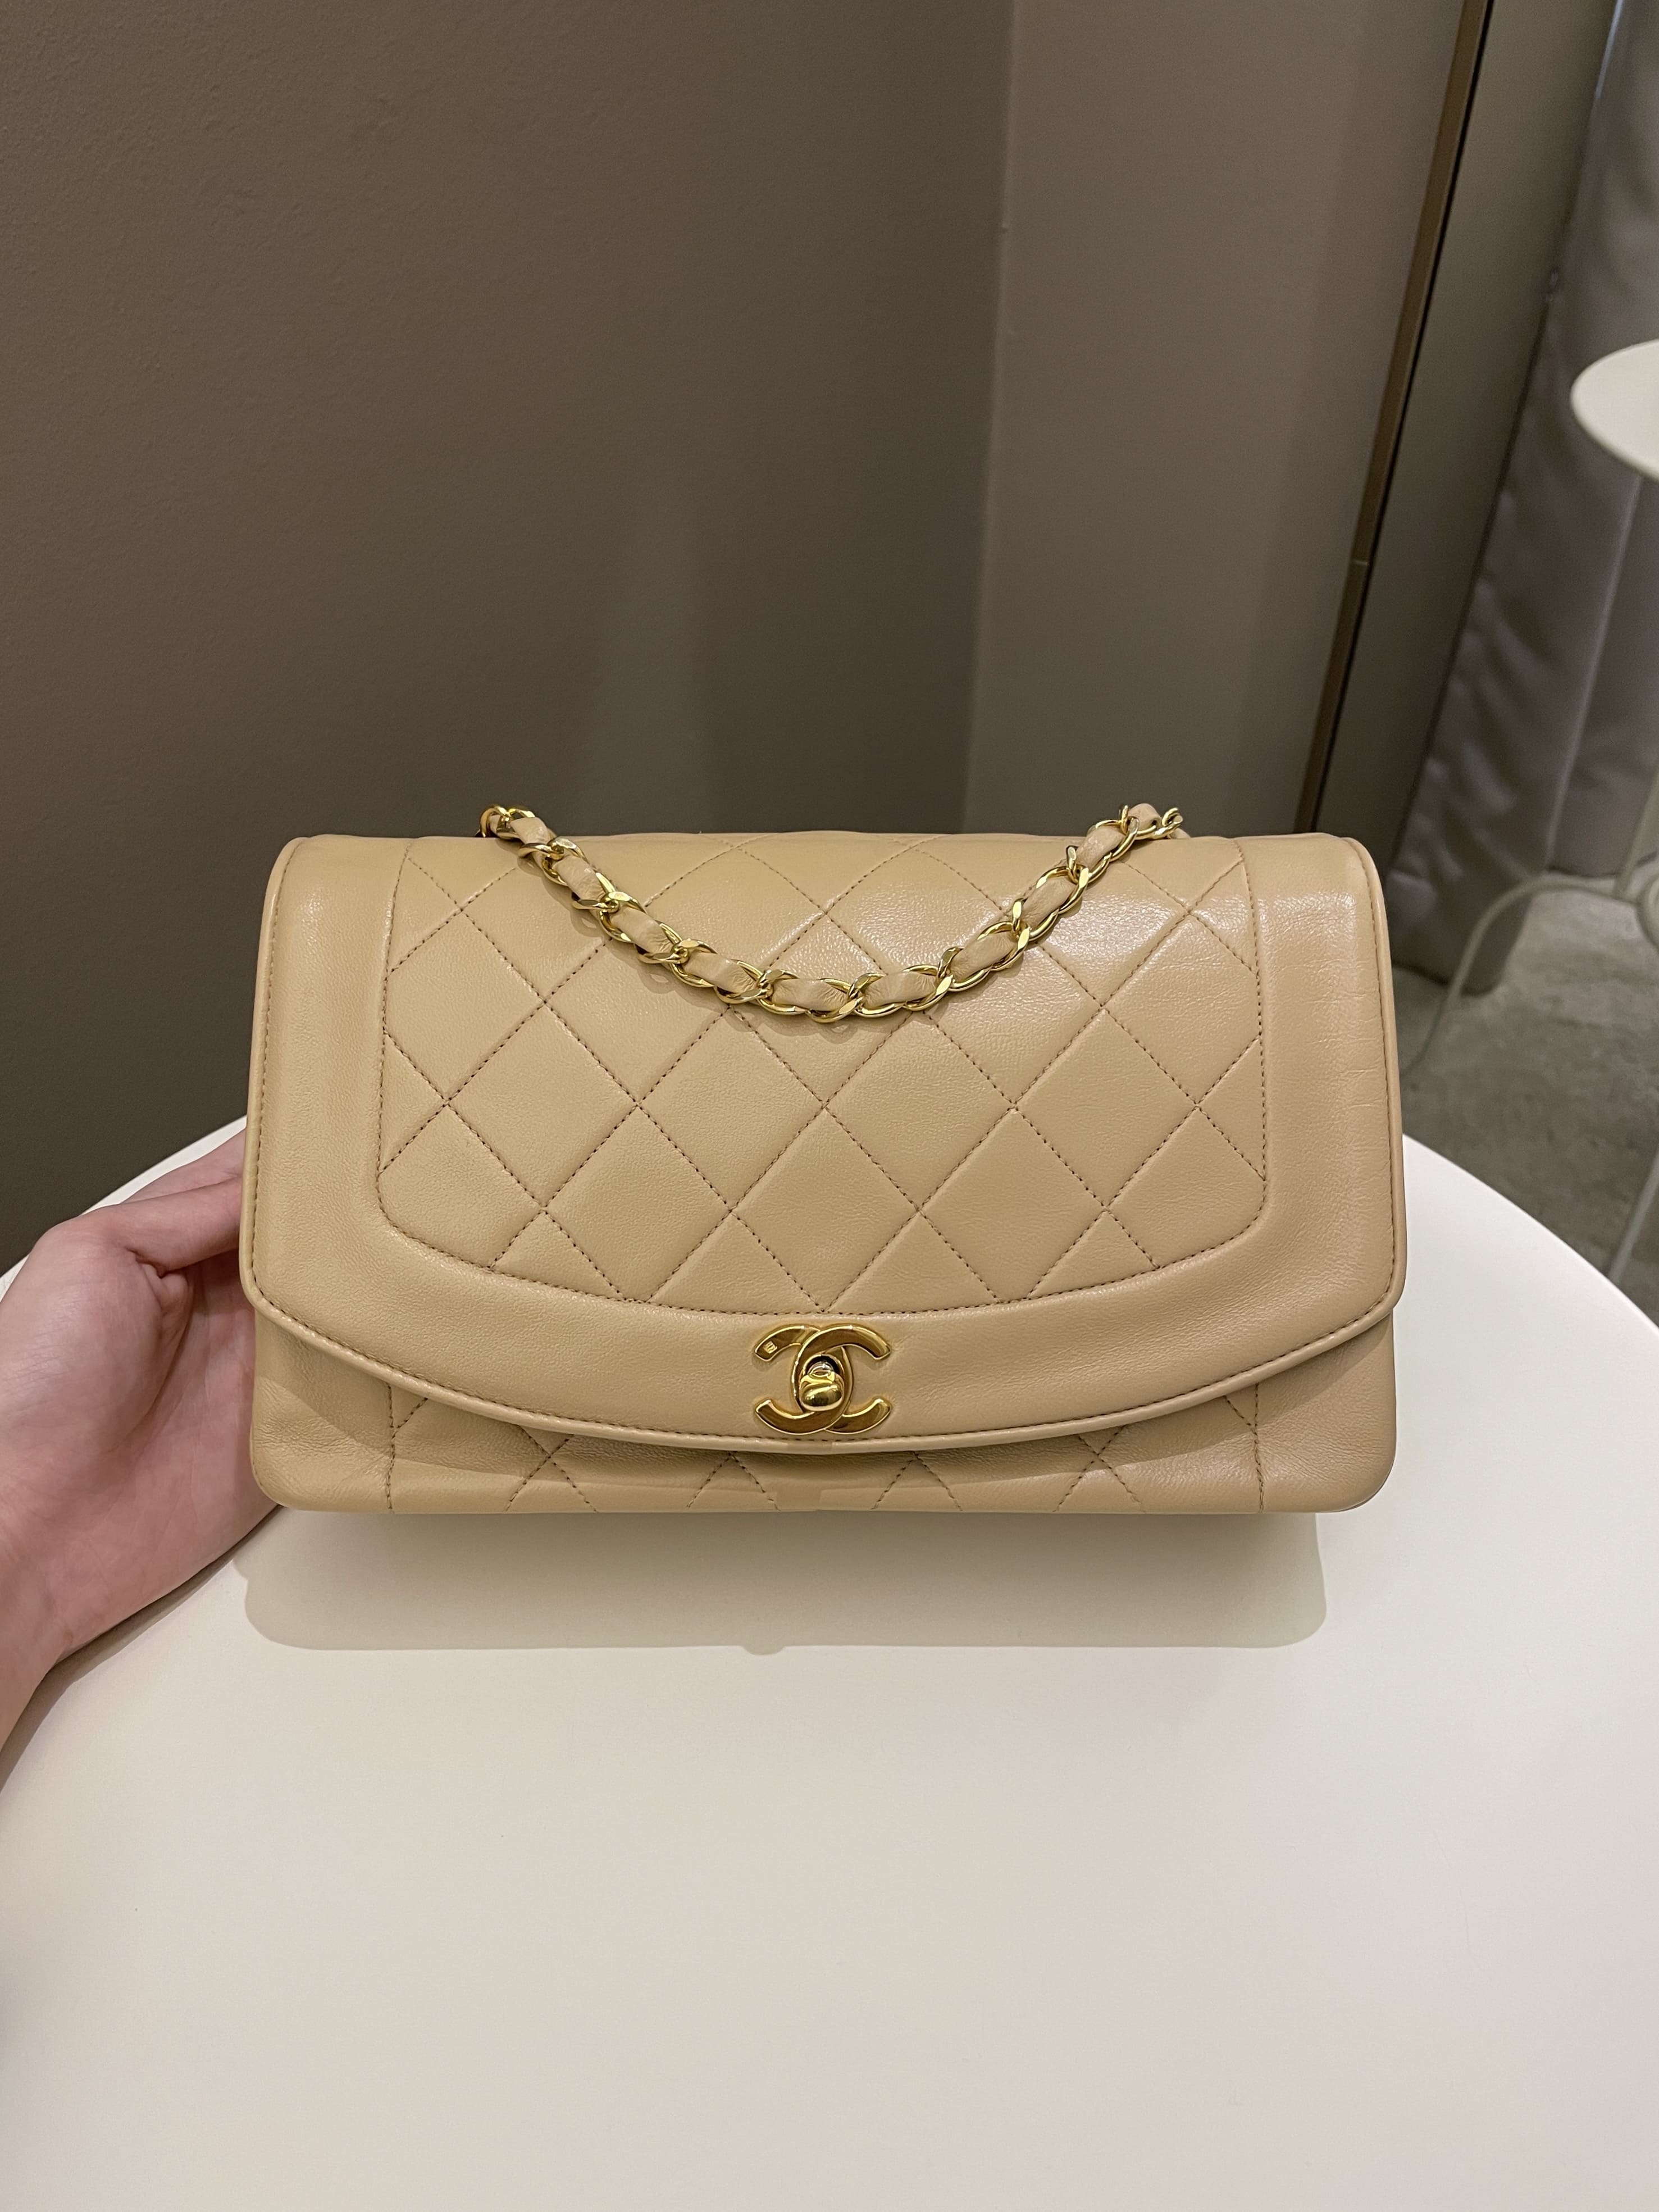 Chanel Vintage Quilted Diana Flap Bag Beige Lambskin